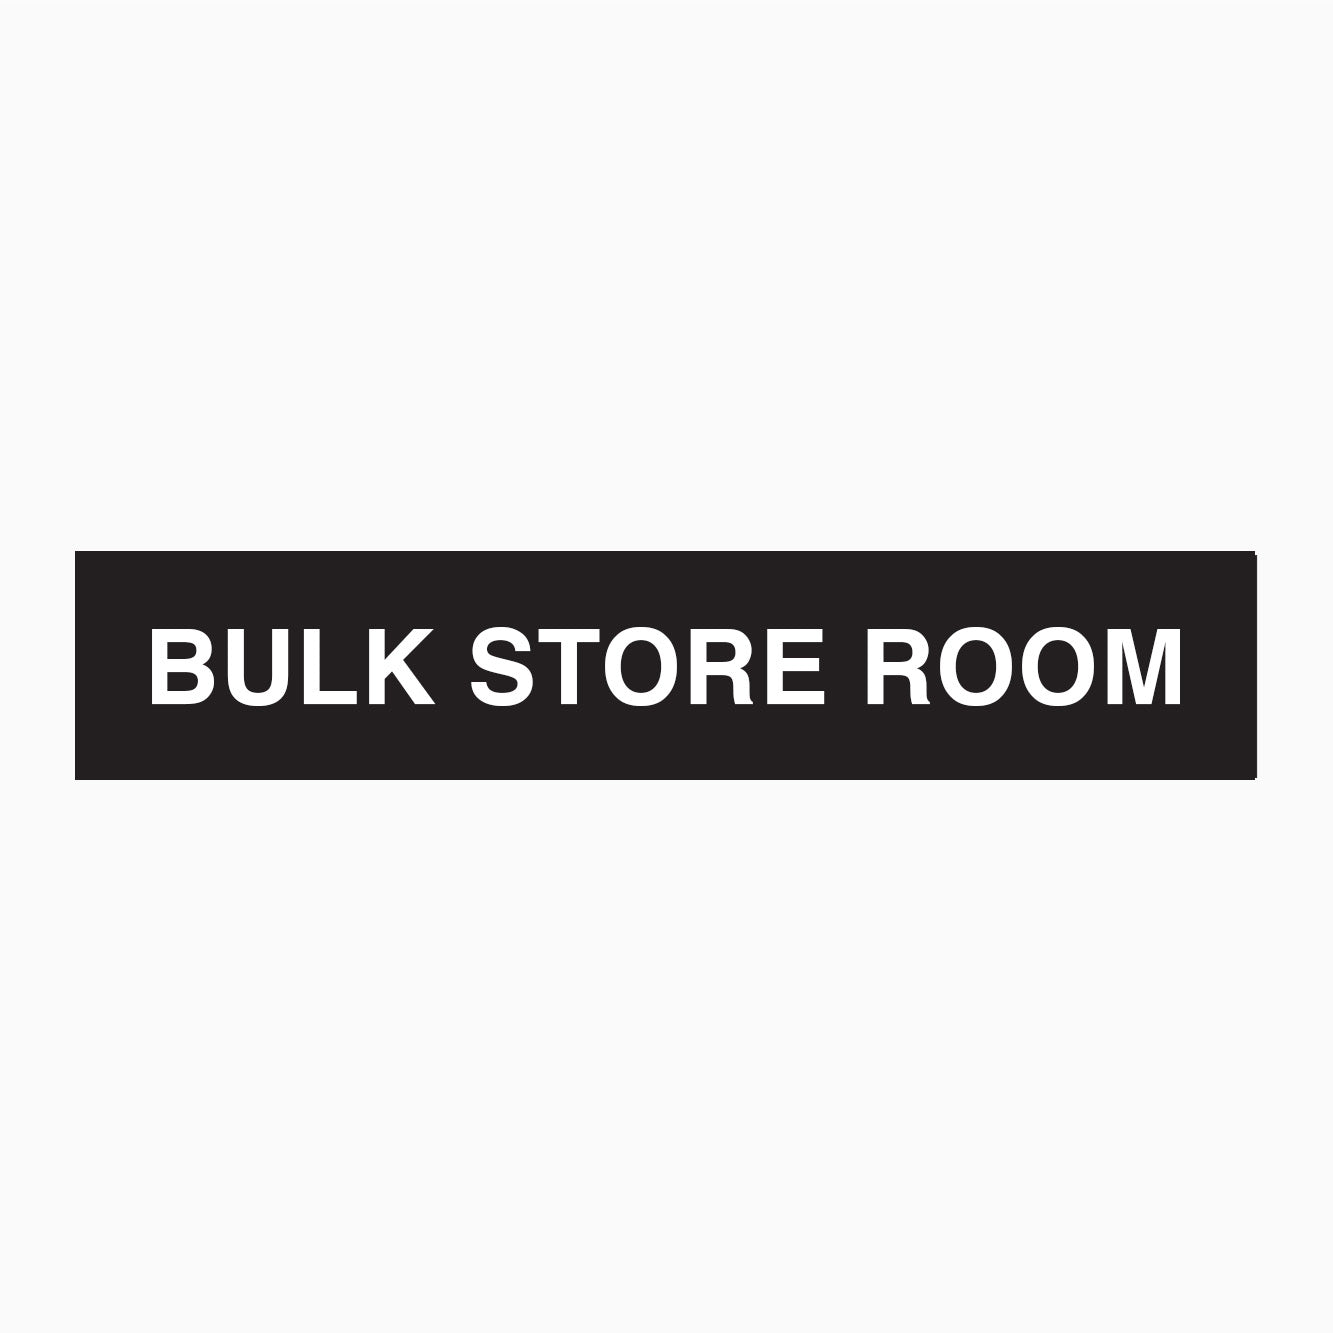 BULK STORE ROOM SIGN - STATUTORY SIGNS IN AUSTRALIA AT GET SIGNS